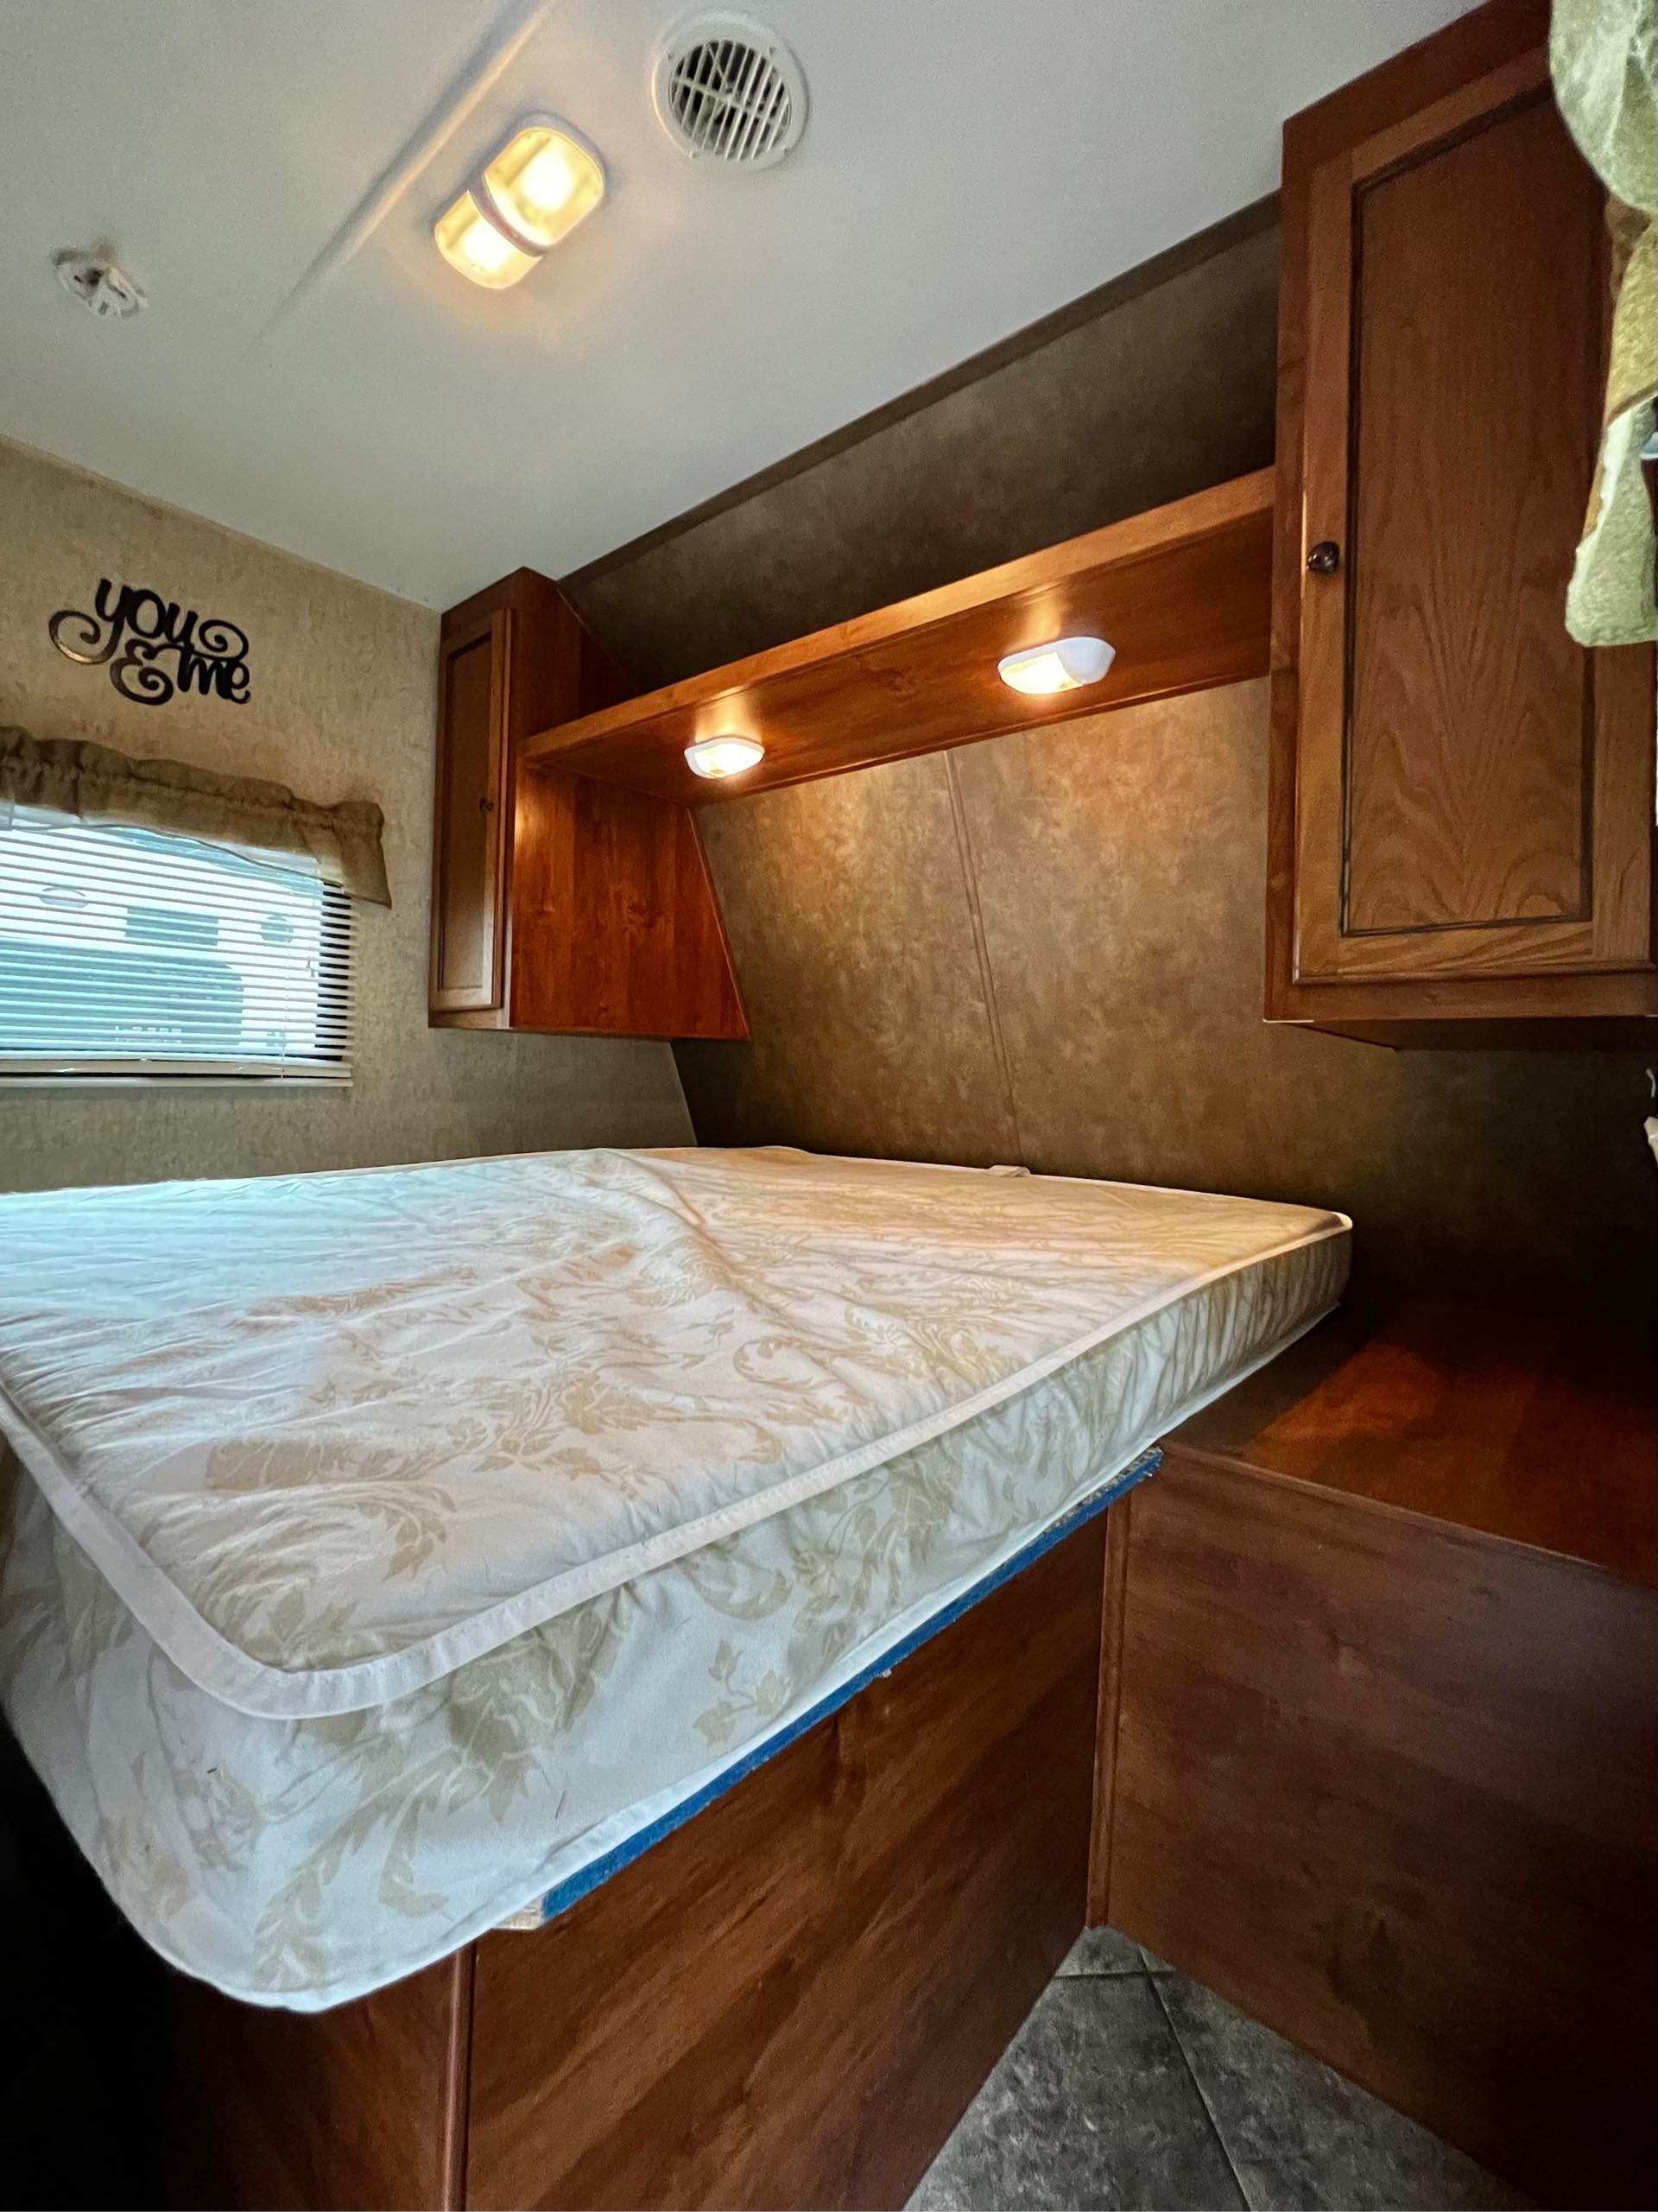 2013 Heartland Trail Runner SLE TR SLE 26 at Lee's Country RV